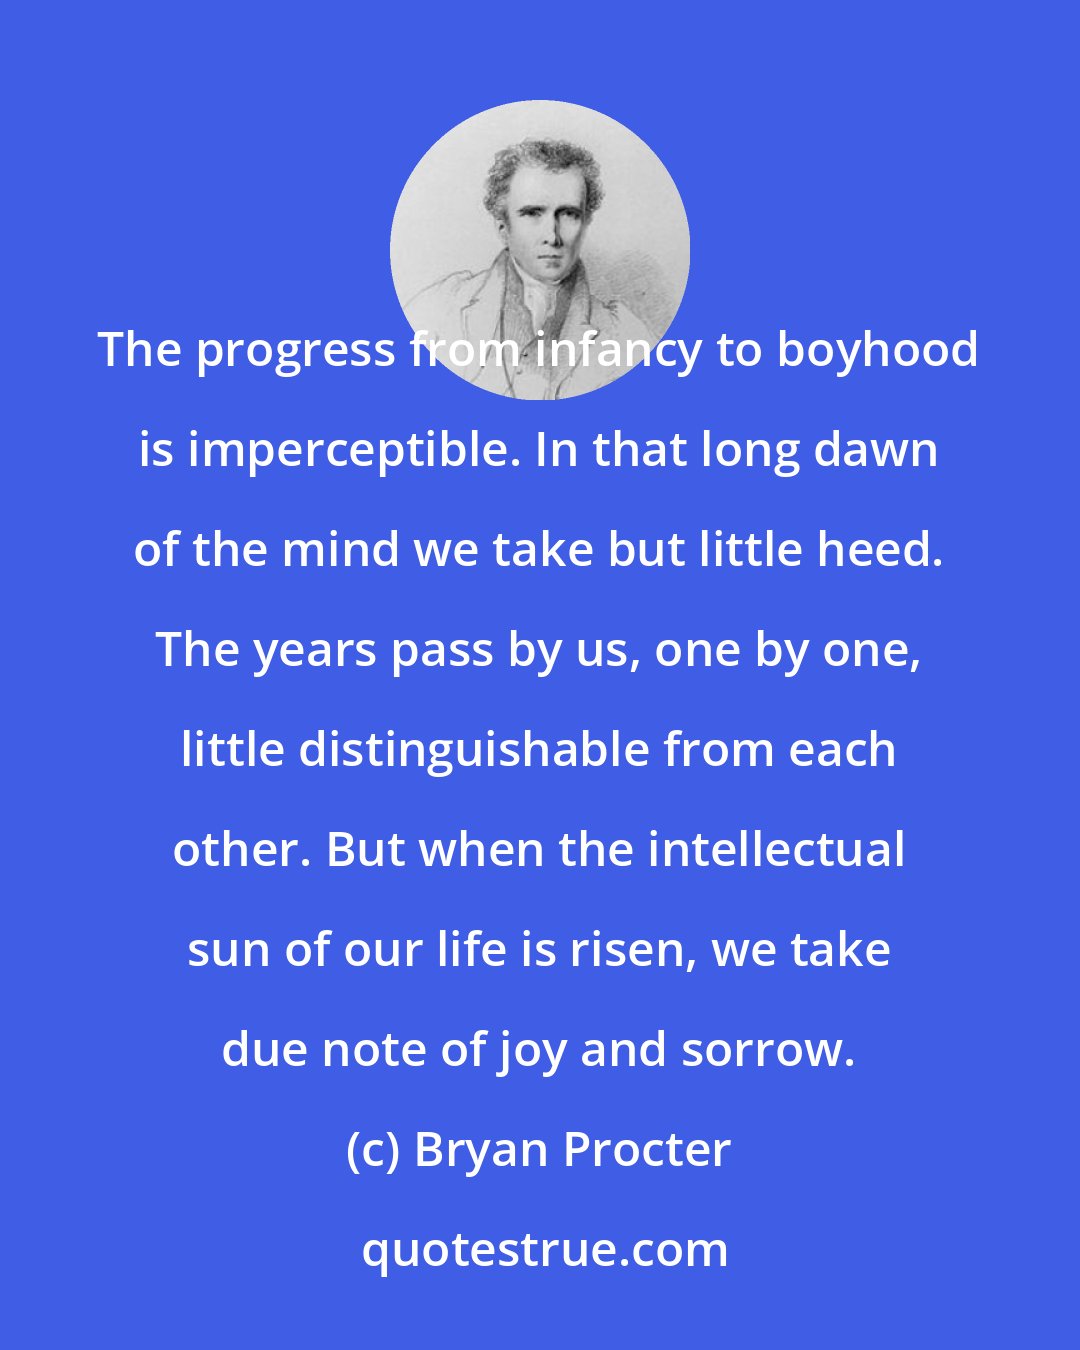 Bryan Procter: The progress from infancy to boyhood is imperceptible. In that long dawn of the mind we take but little heed. The years pass by us, one by one, little distinguishable from each other. But when the intellectual sun of our life is risen, we take due note of joy and sorrow.